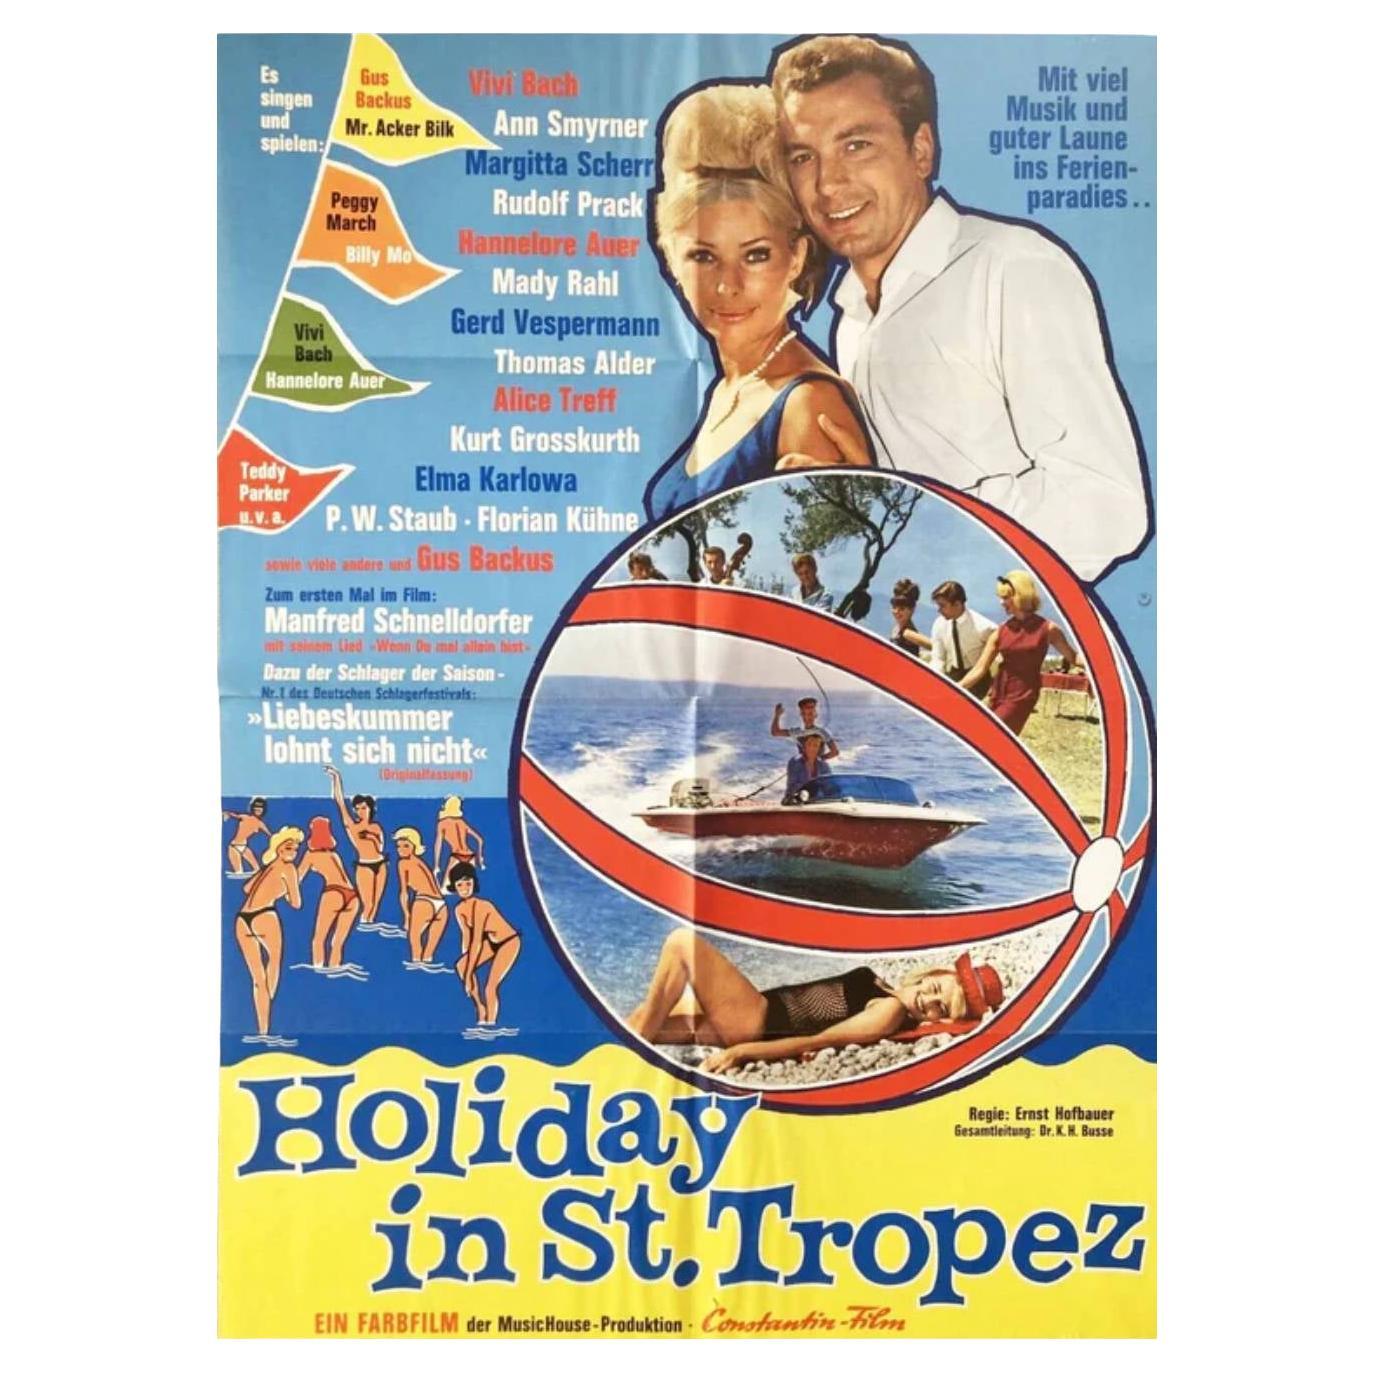 1967 "Holiday in St. Tropez"  Original Movie Cinema Poster   For Sale